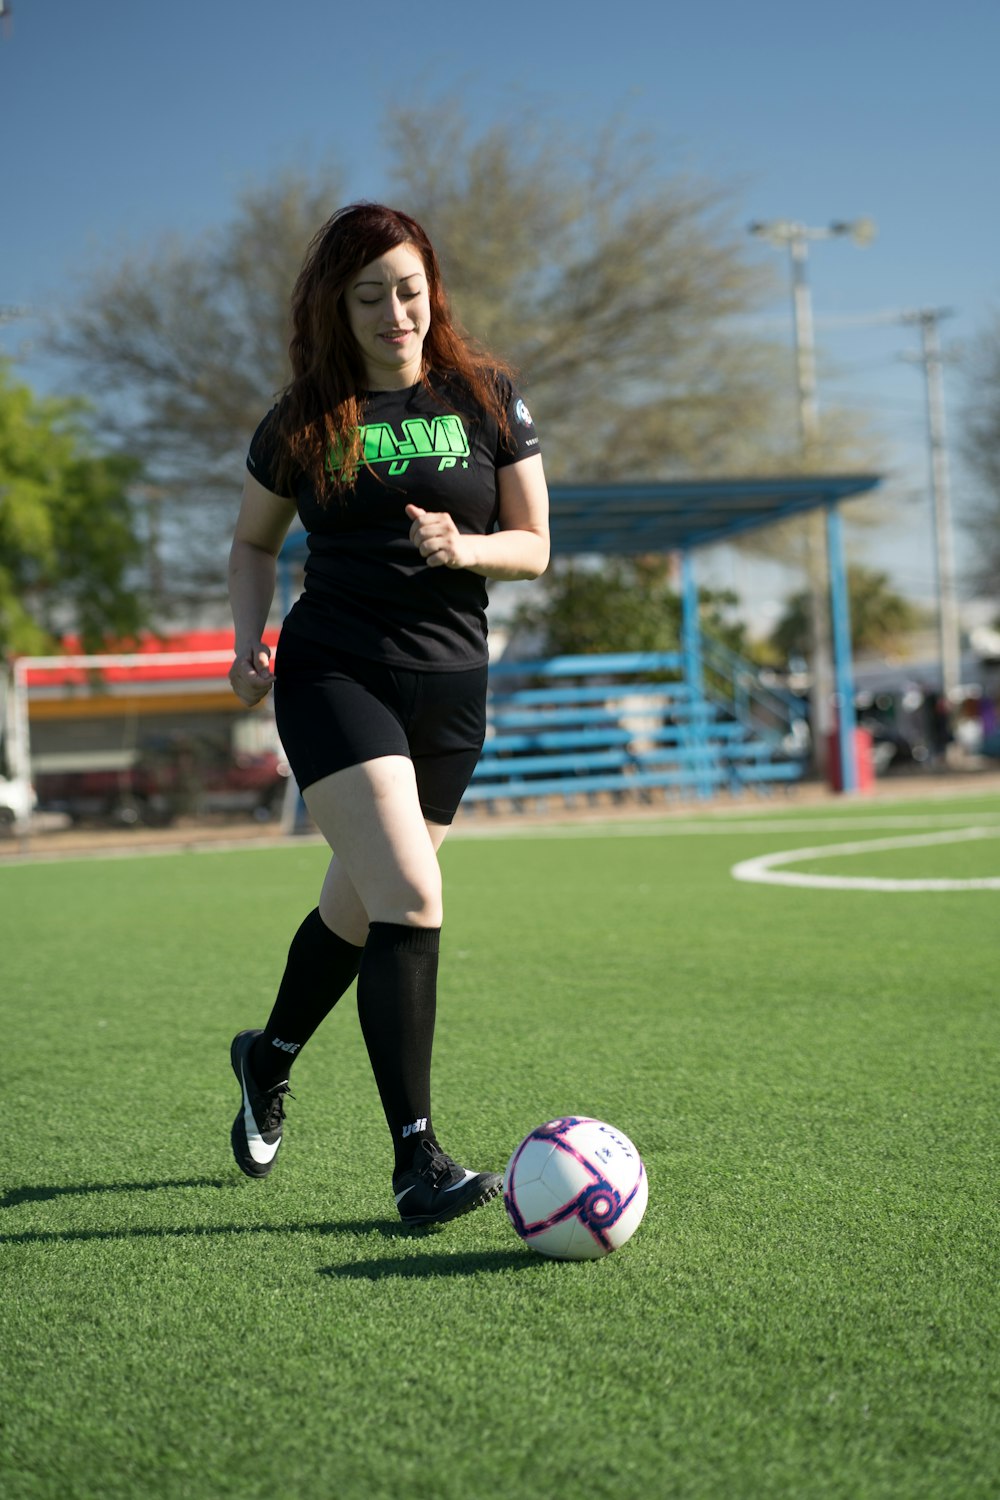 woman in black and green nike soccer jersey kicking soccer ball on green grass field during